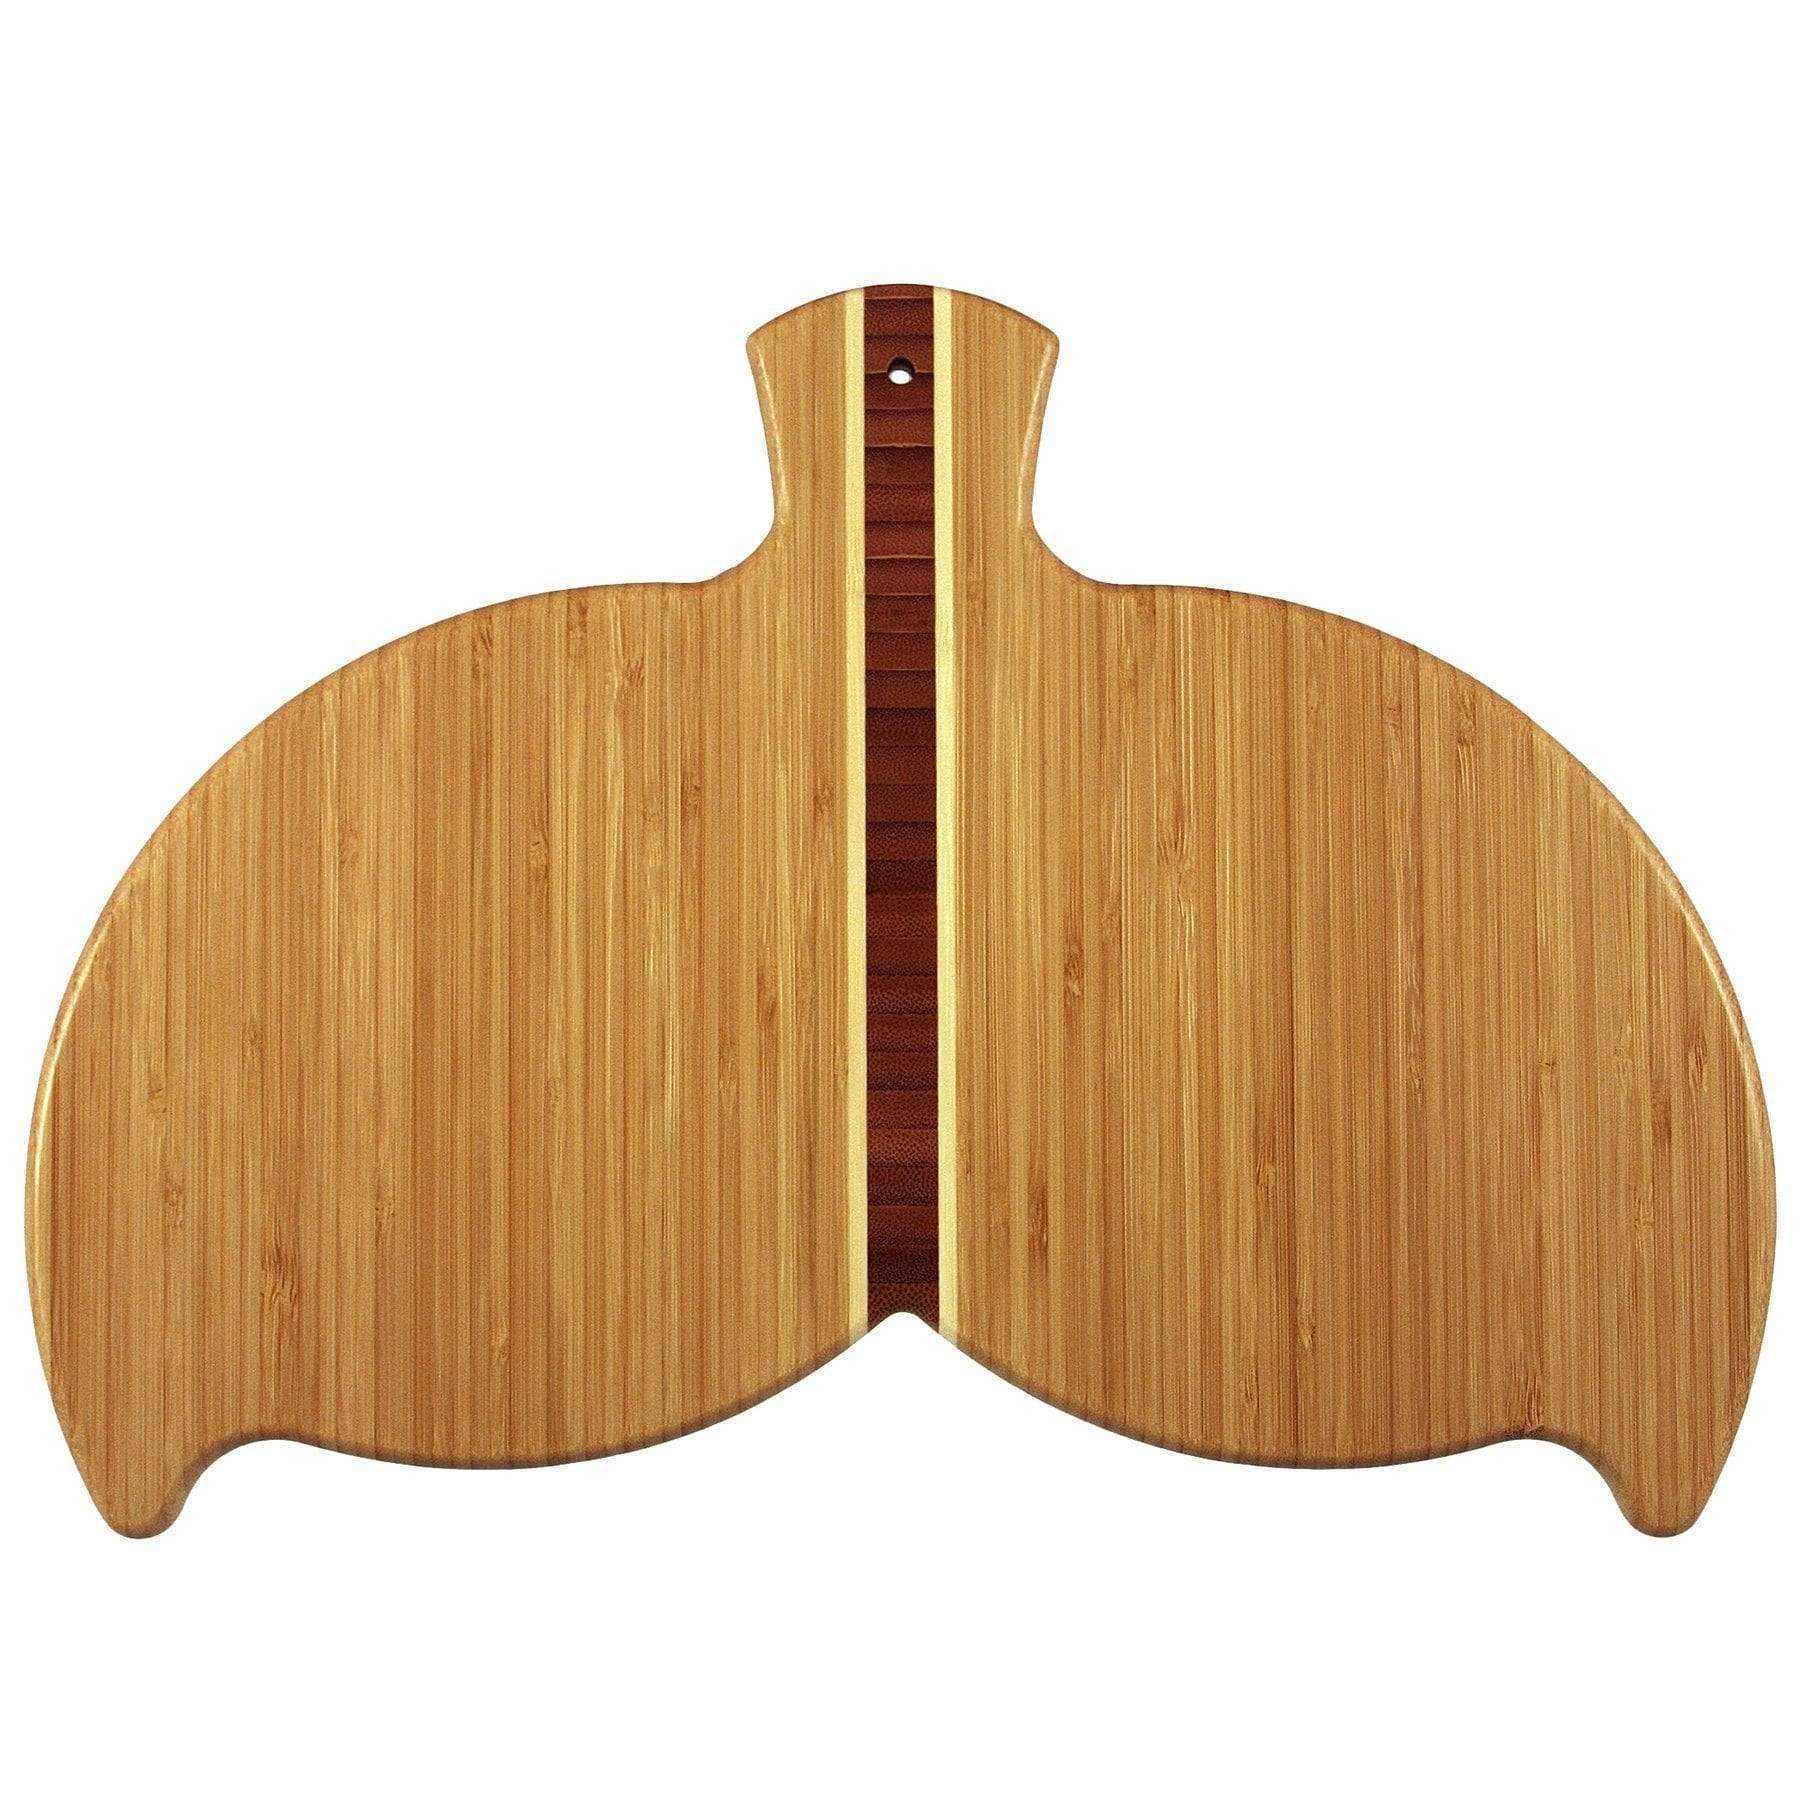 https://totallybamboo.com/cdn/shop/products/whale-tail-shaped-serving-and-cutting-board-14-12-x-10-12-totally-bamboo-146370.jpg?v=1628054499